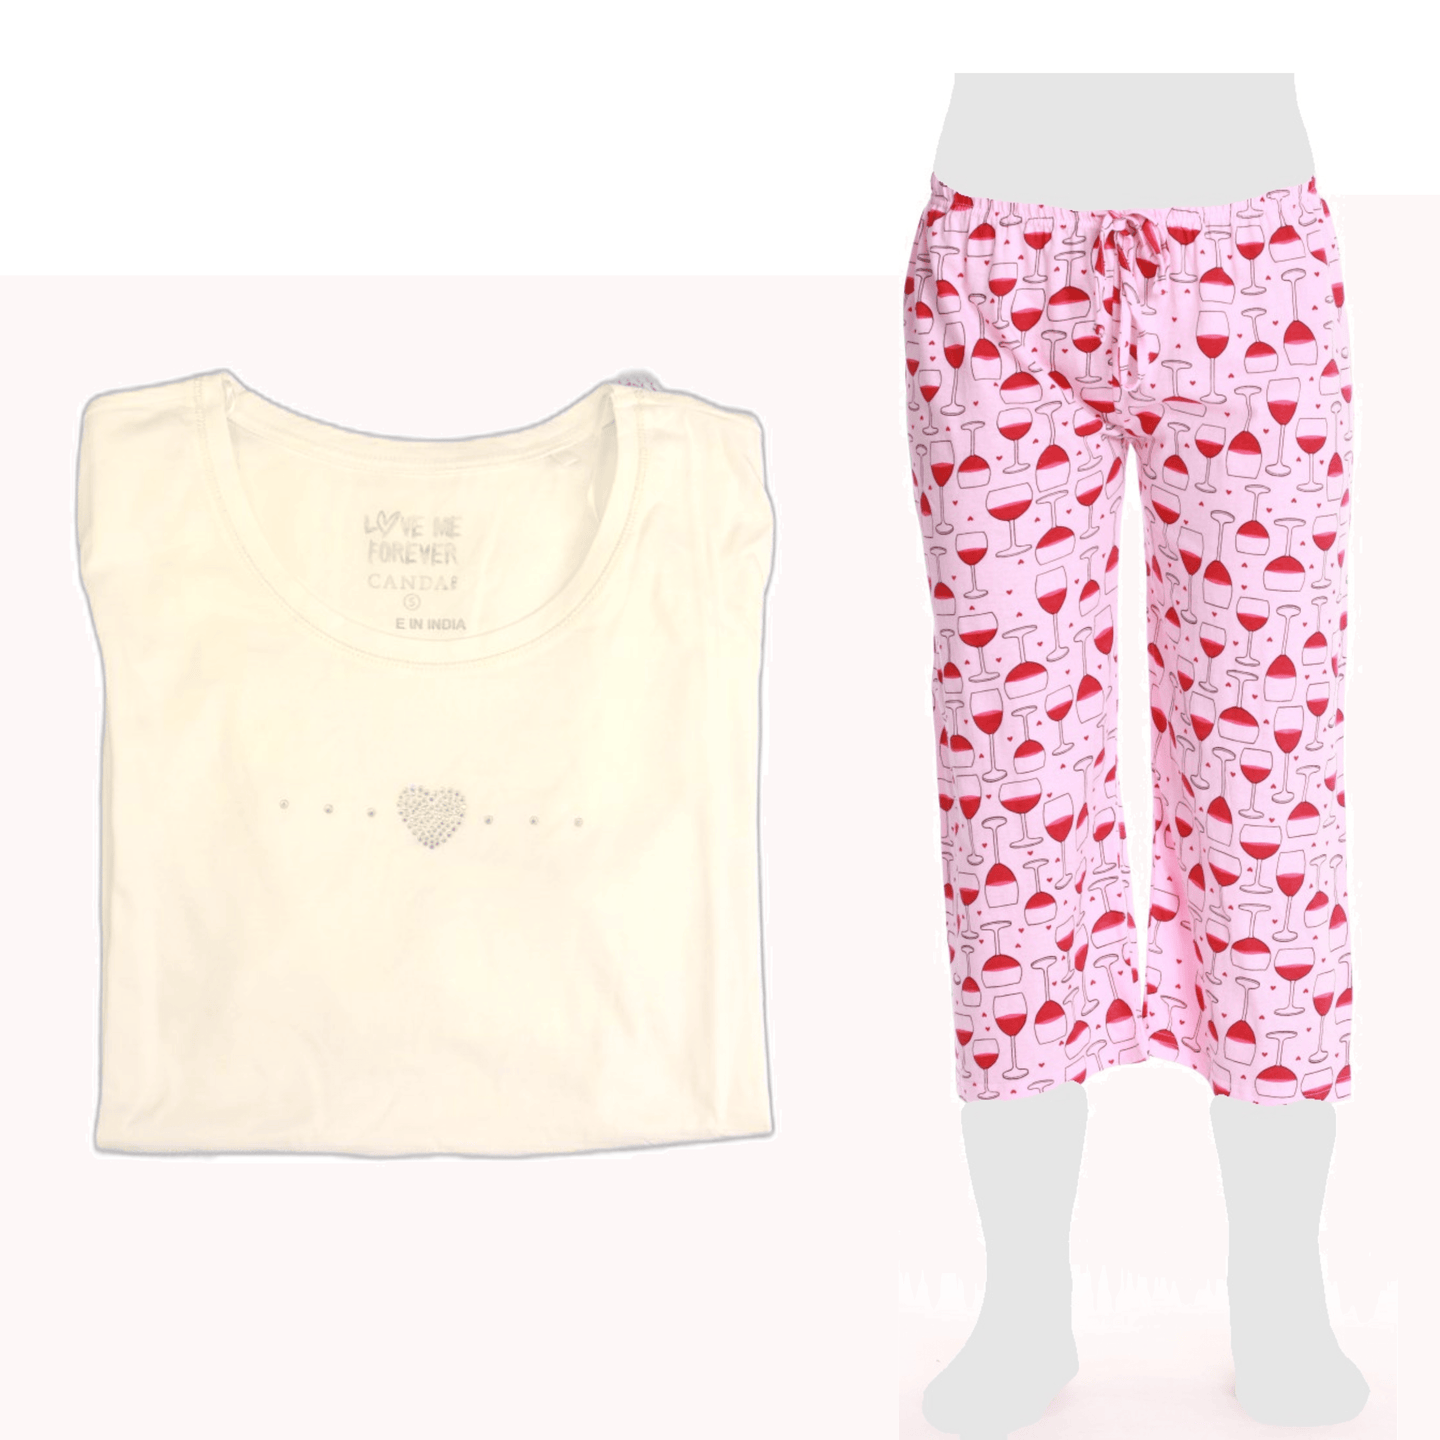 Women's Cozy Pajama Set Pink Wine glass Pants and Cotton Soft Heart T shirt by Just Love - PremiumBrandGoods